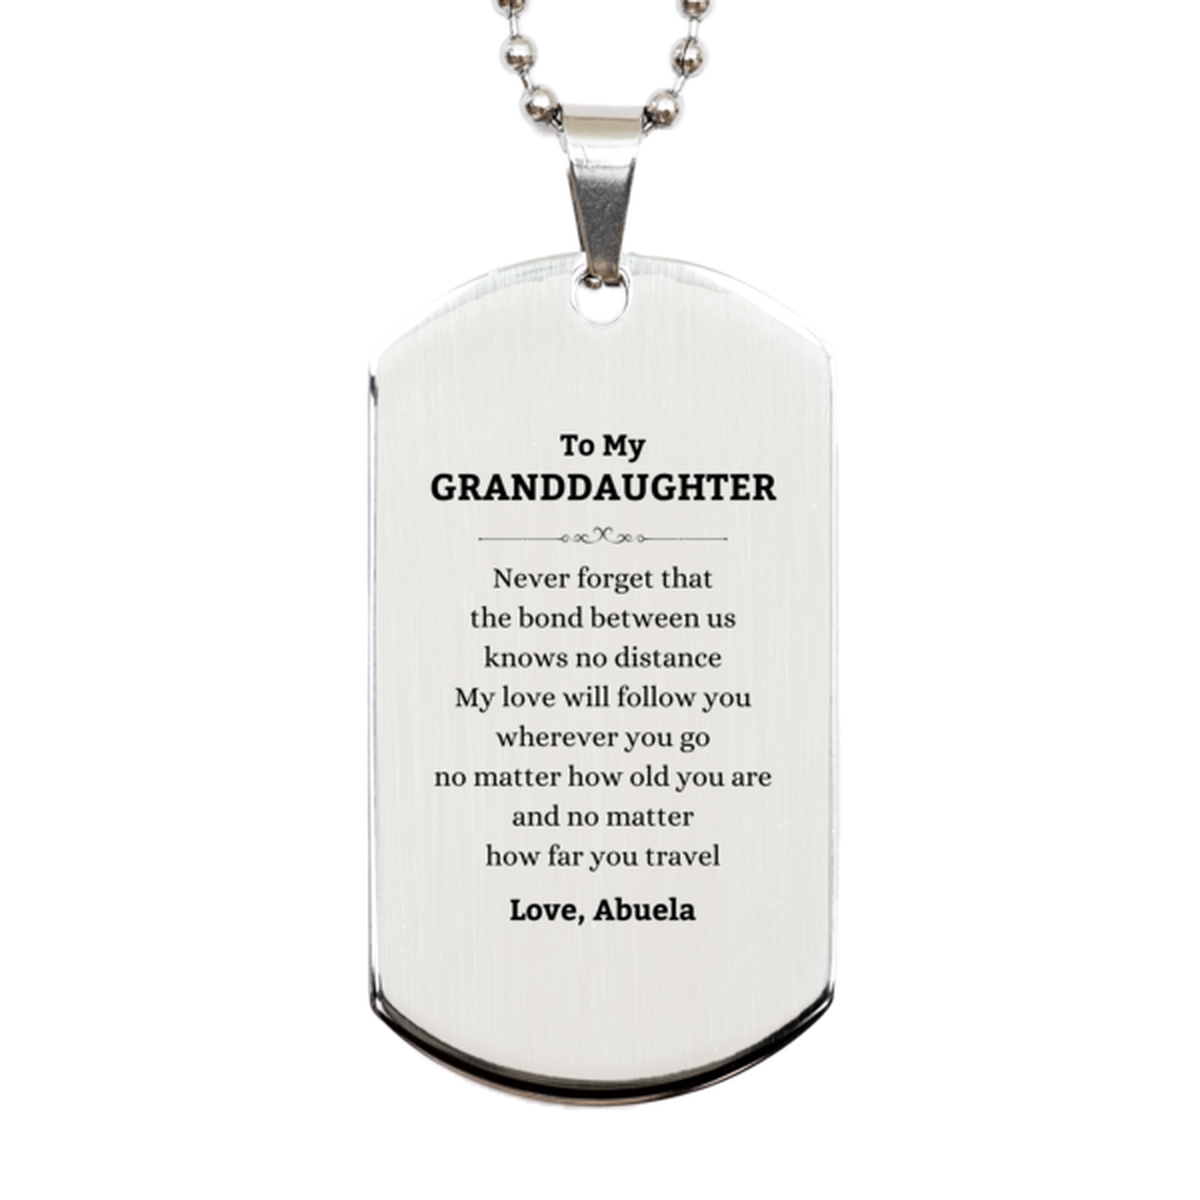 Granddaughter Birthday Gifts from Abuela, Adjustable Silver Dog Tag for Granddaughter Christmas Graduation Unique Gifts Granddaughter Never forget that the bond between us knows no distance. Love, Abuela